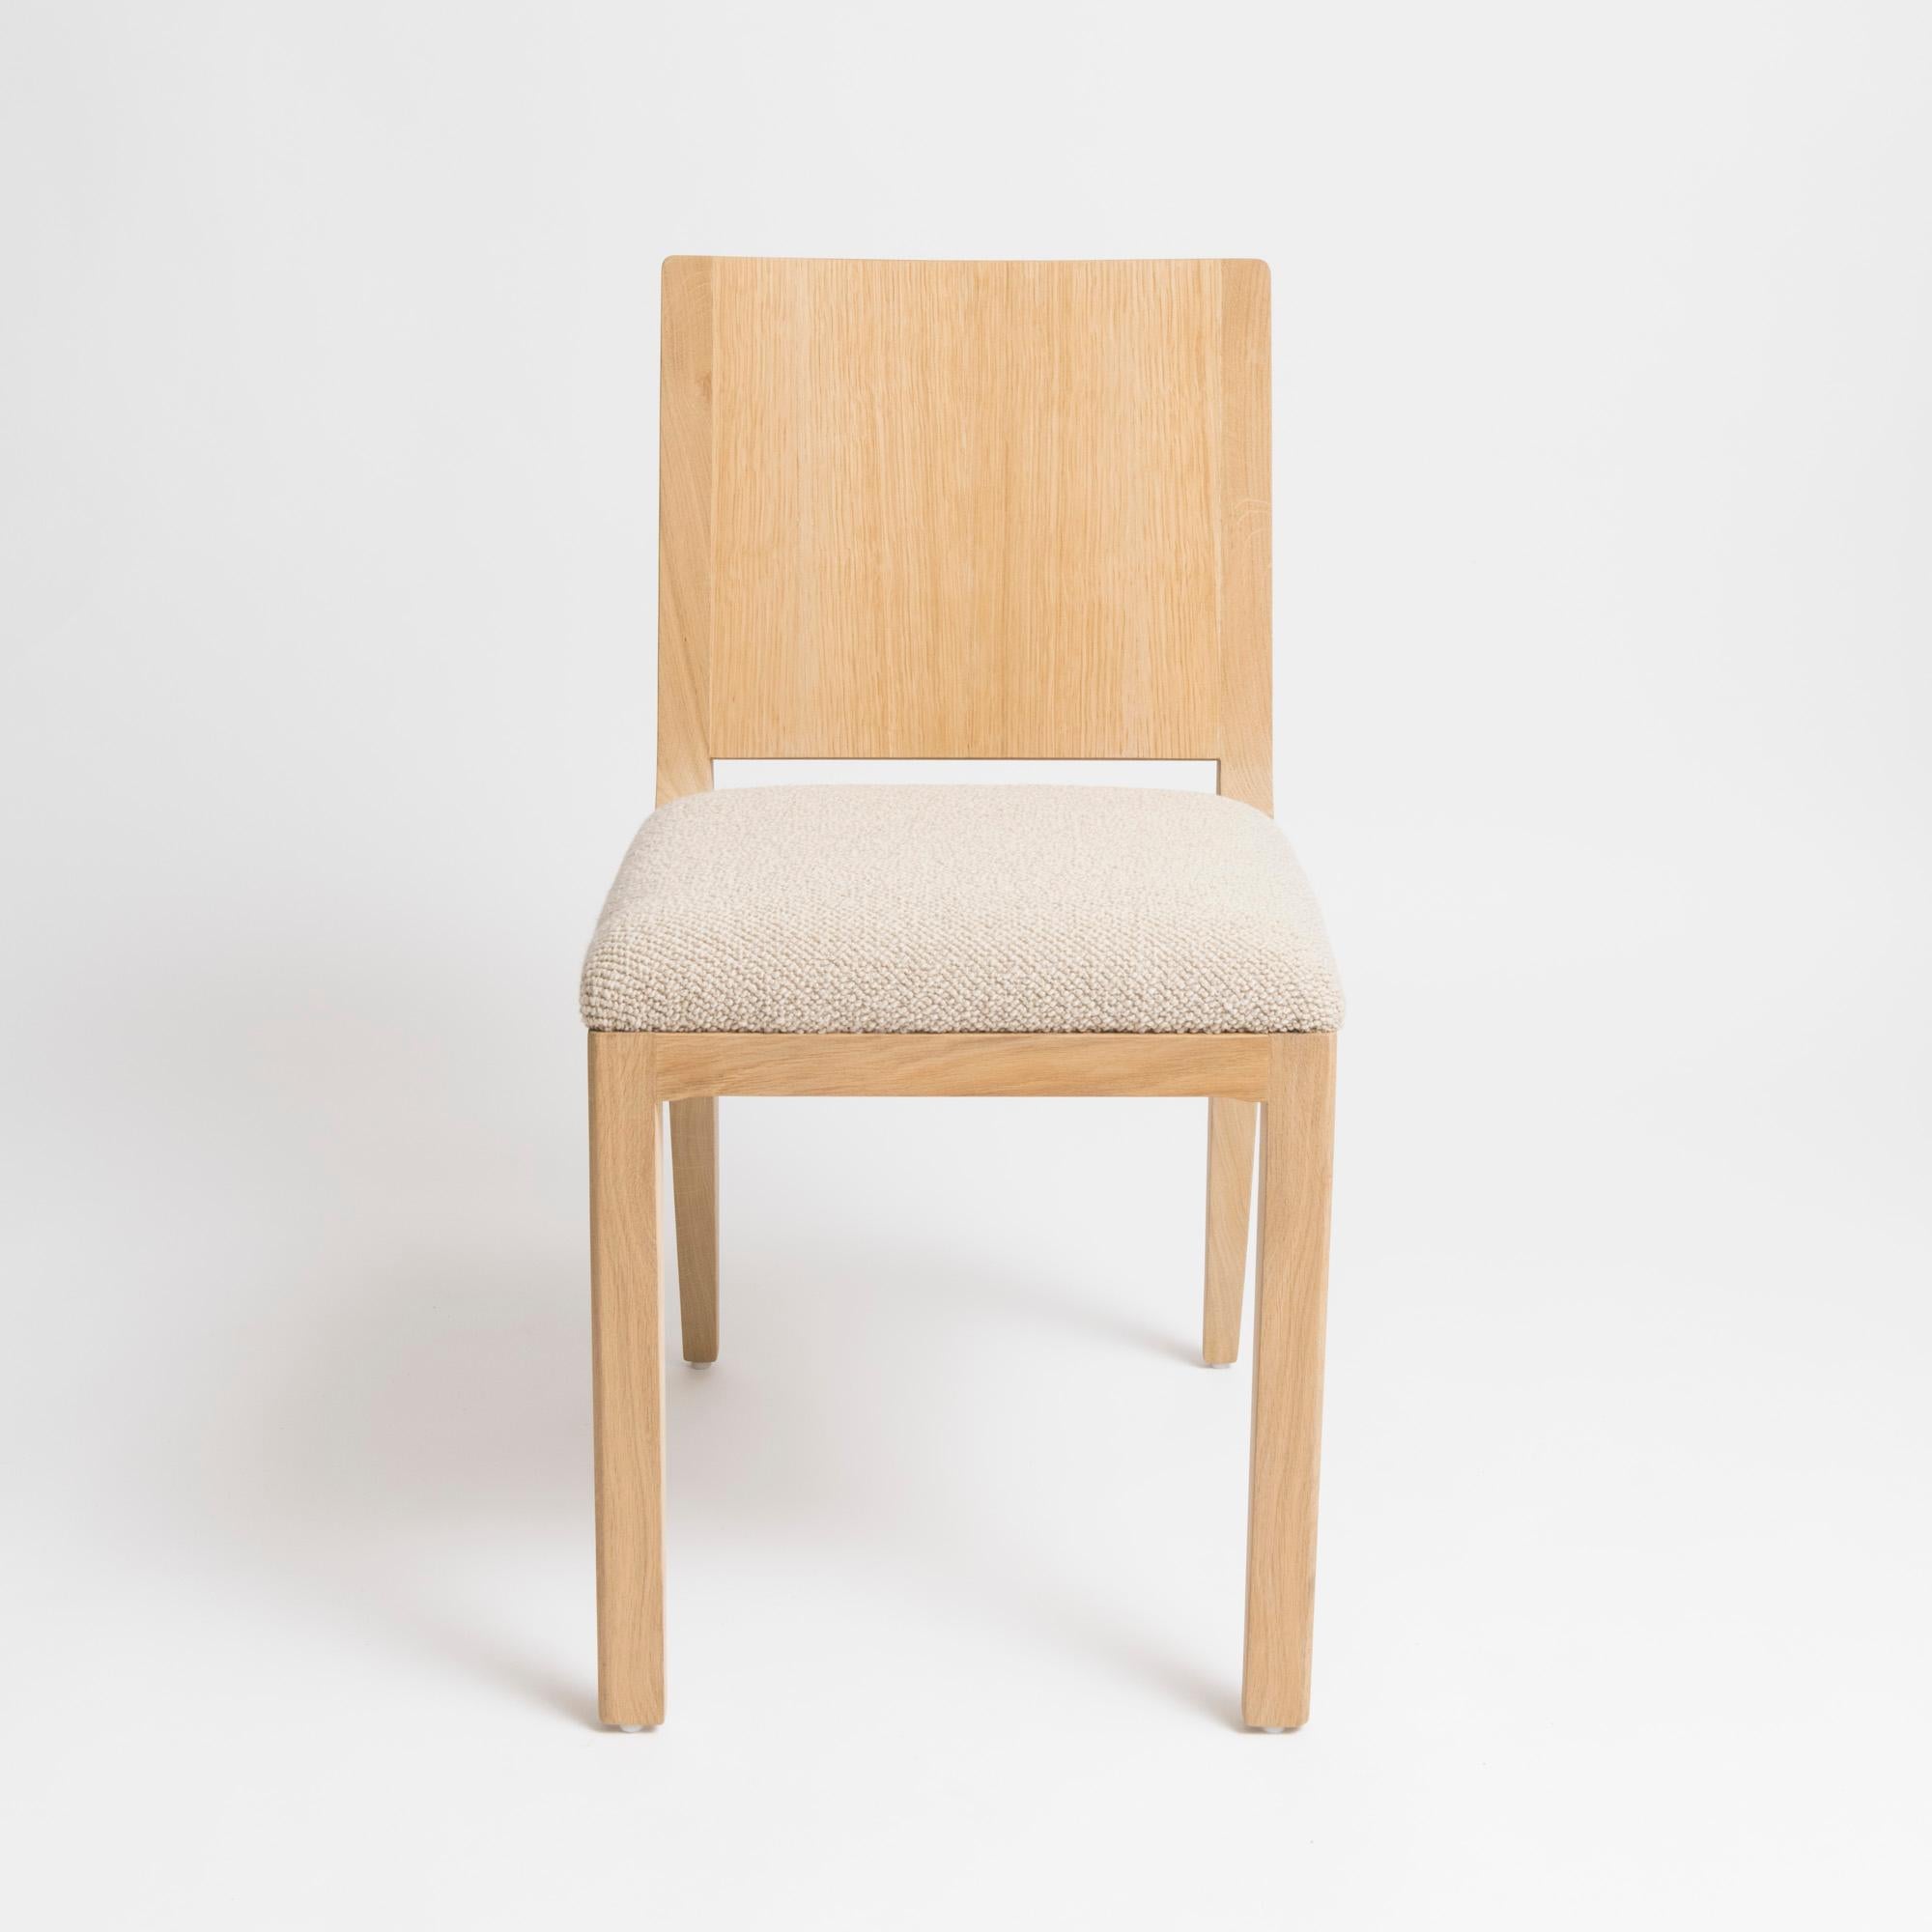 Minimal modern design chair by Parisian based studio mjiila. The om5.1 is a contemporary upholstered high-end chair handcrafted by skilled cabinetmaker. Available in soaped natural french oak, upholstered with 